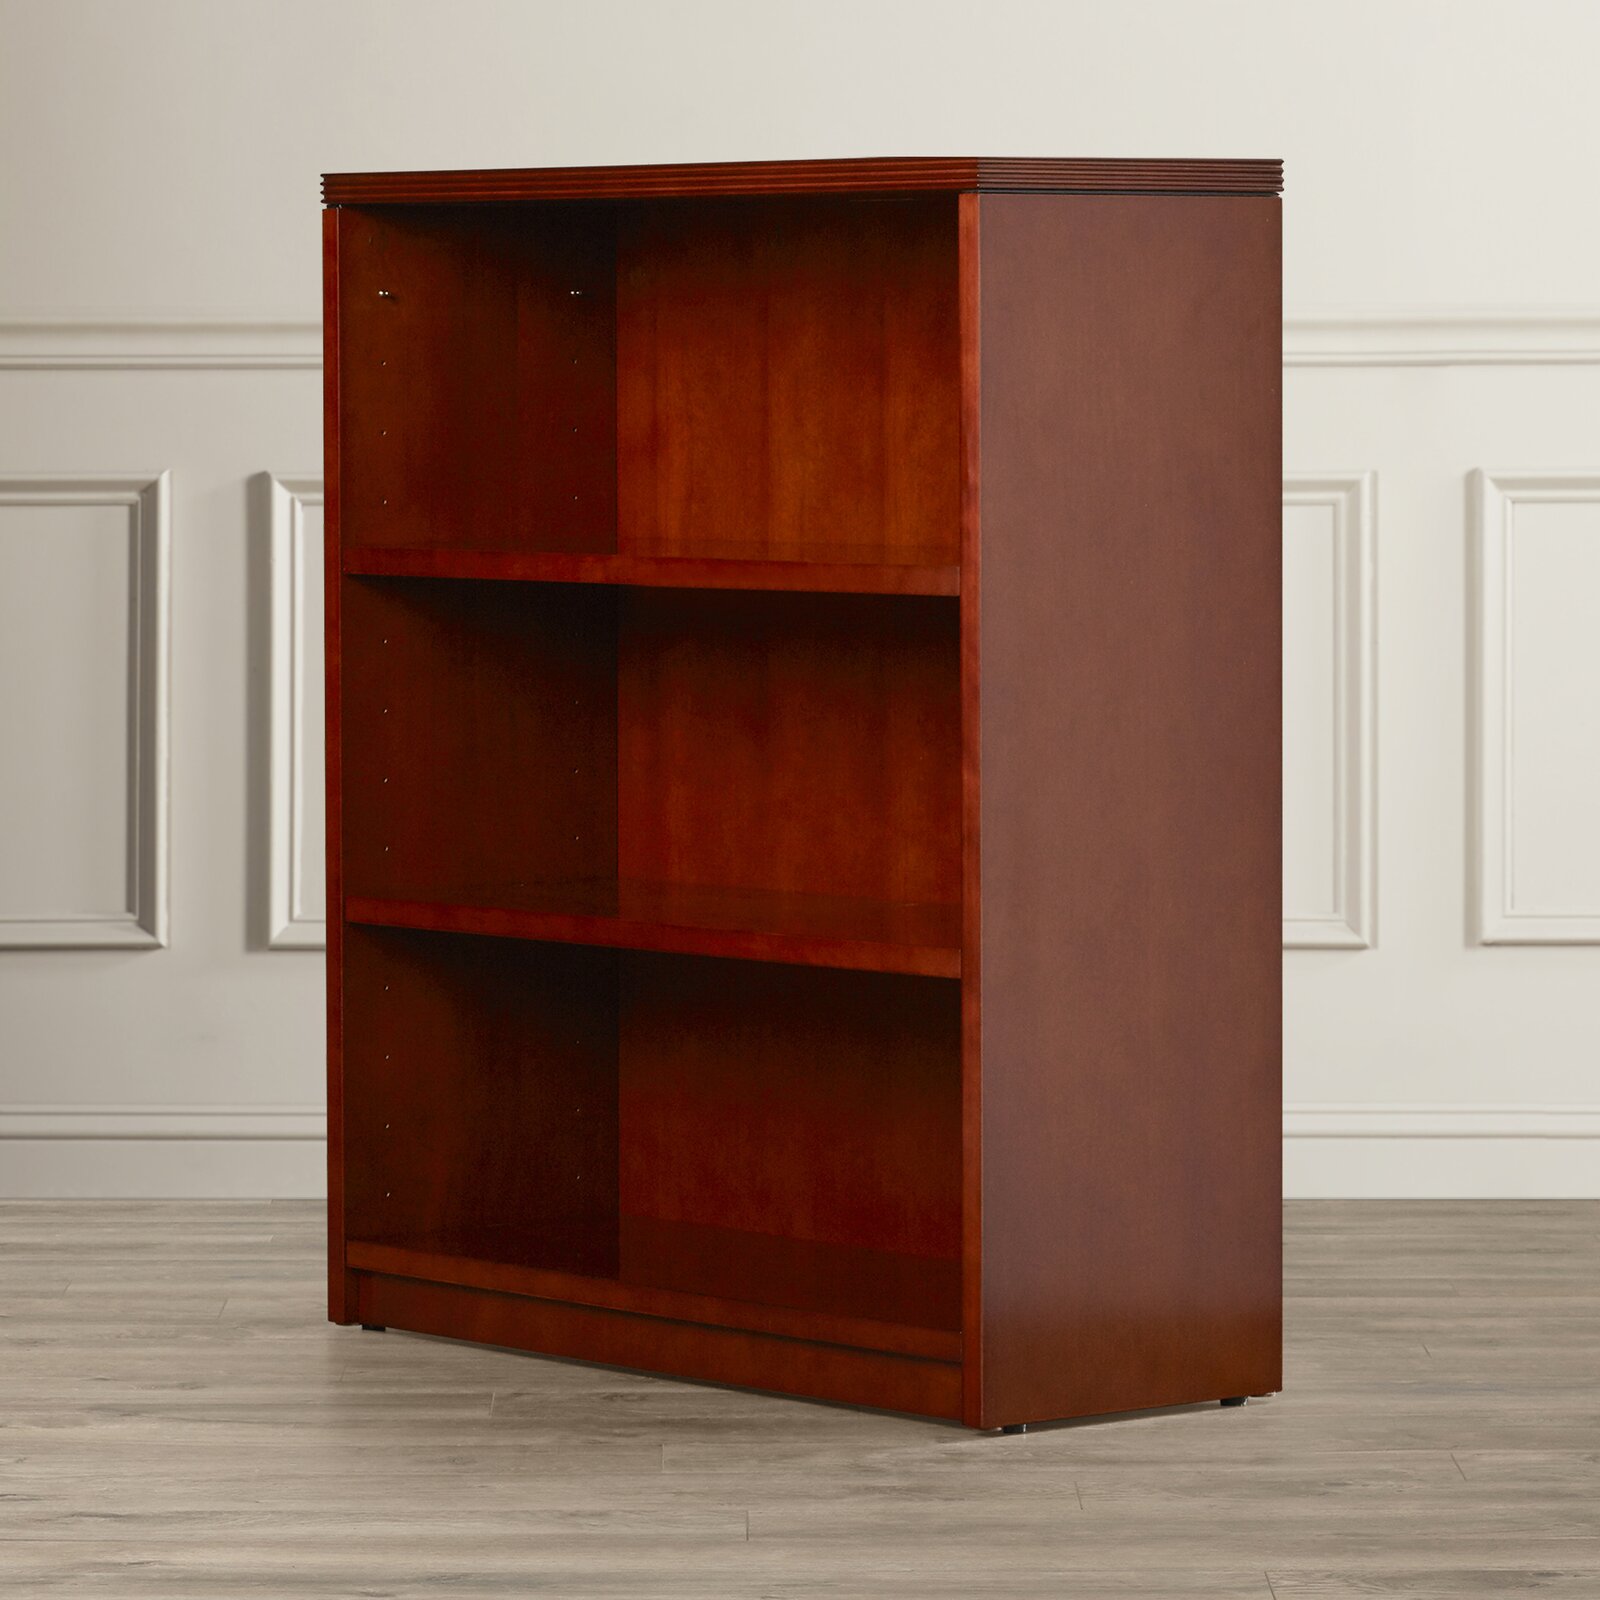 Darby Home Co Lemasters 42'' H x 36'' W Solid Wood Standard Bookcase